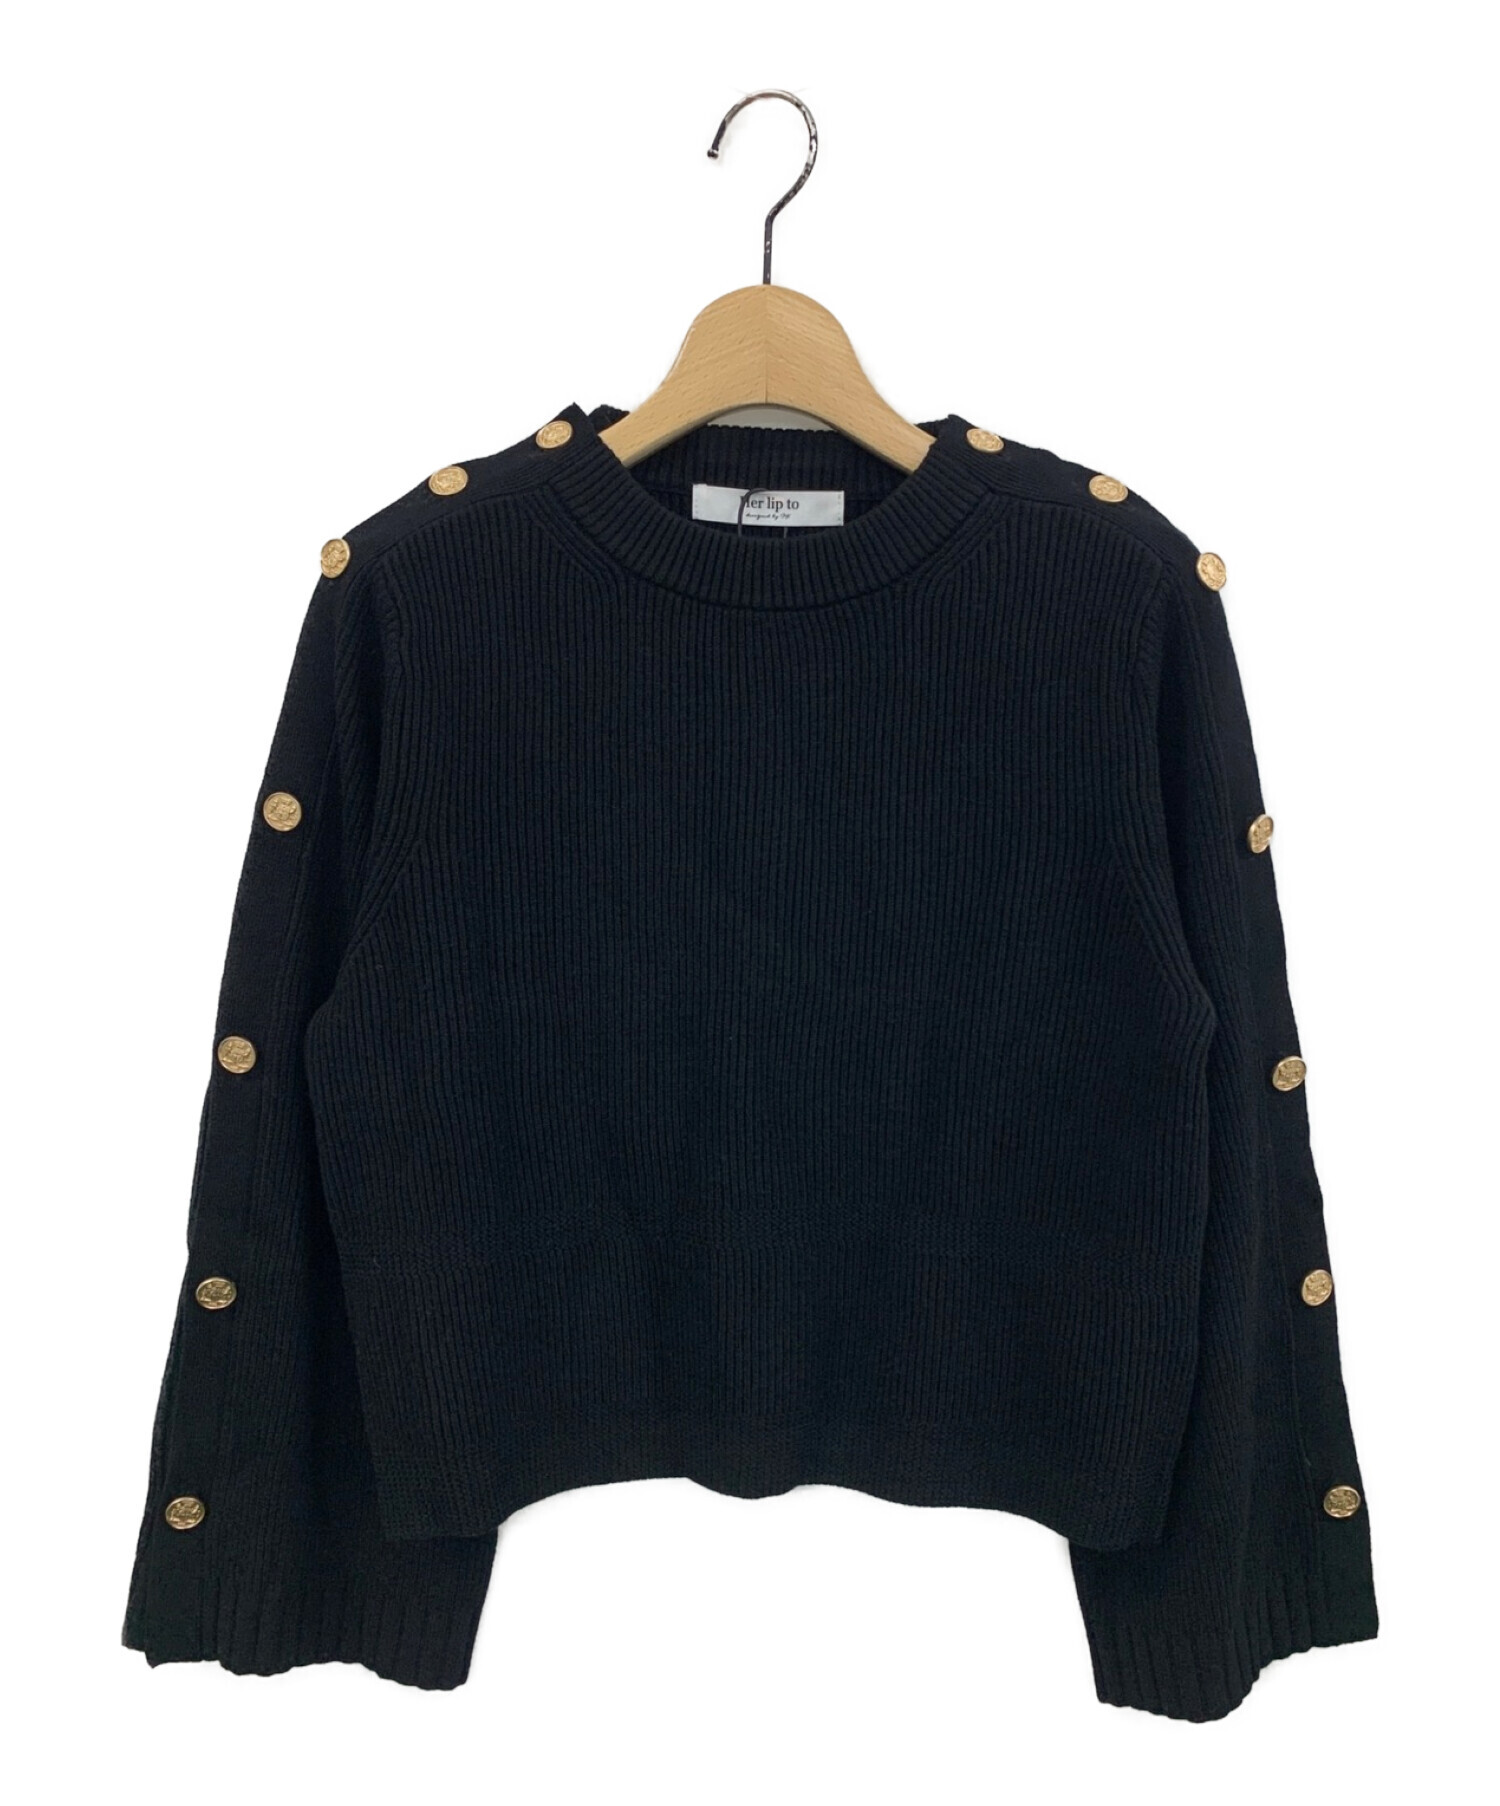 Her lip to (ハーリップトゥ) Embellished-Button Ribbed Knit Pullover ブラック サイズ:M